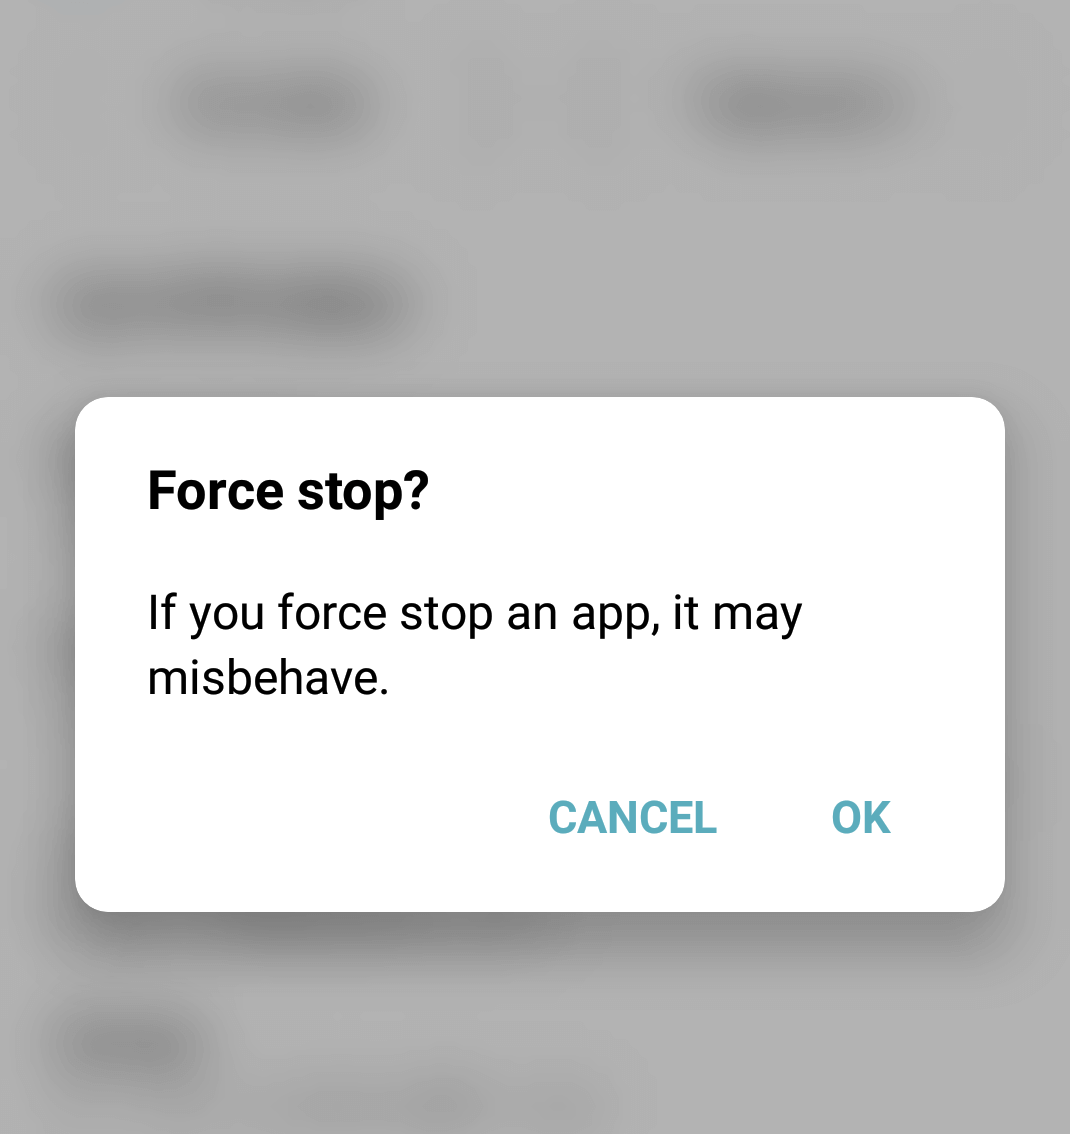 Confirm force stop option